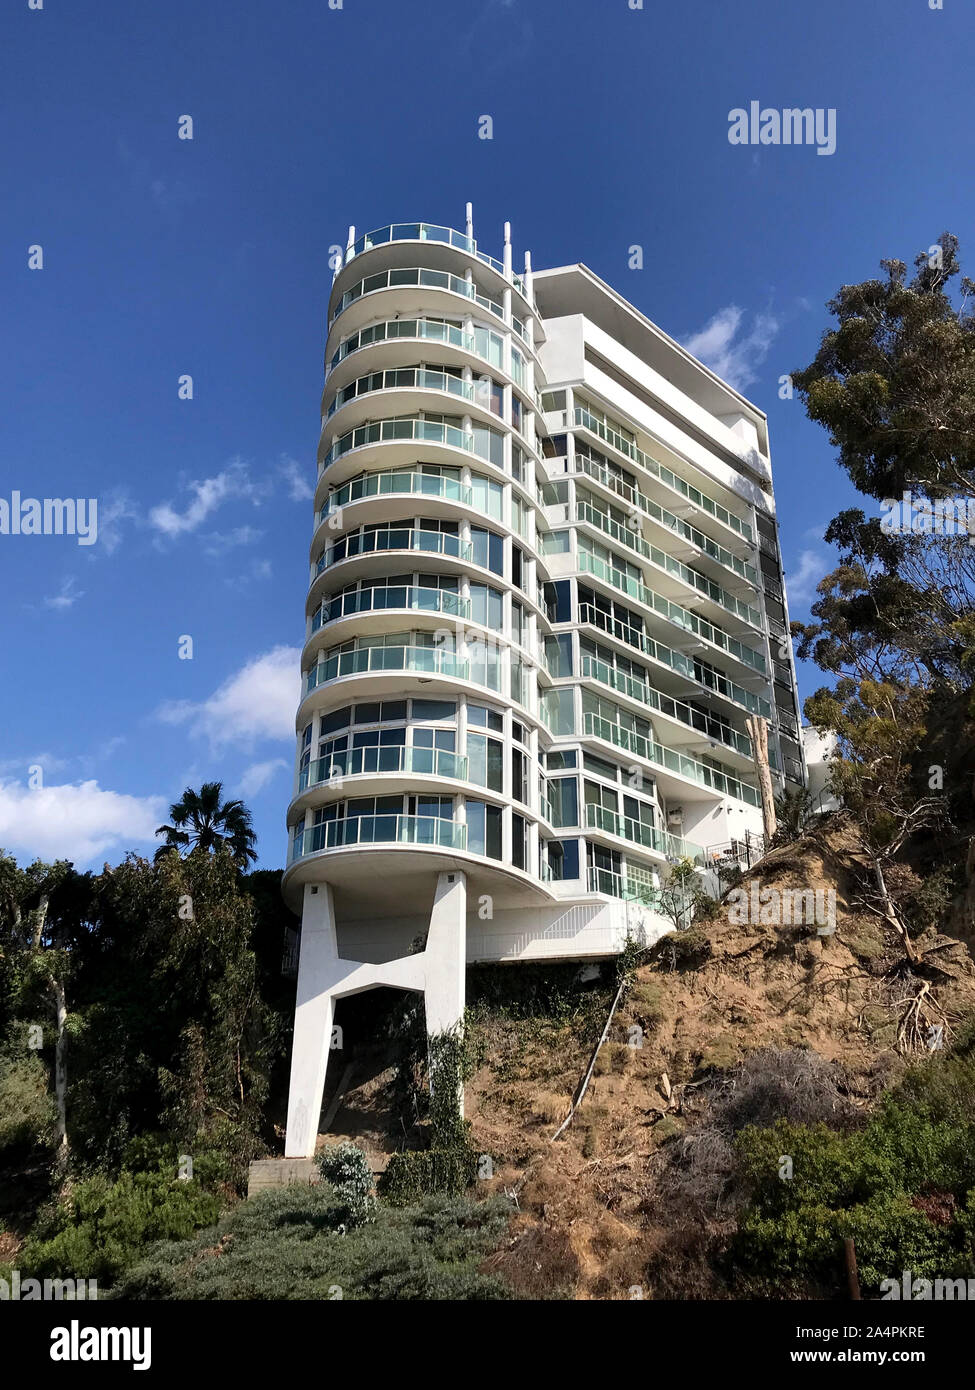 A 1960s era apartment building  located at the Pacific Palisades above the Pacific Coast Highway in Santa Monica, CA. Stock Photo